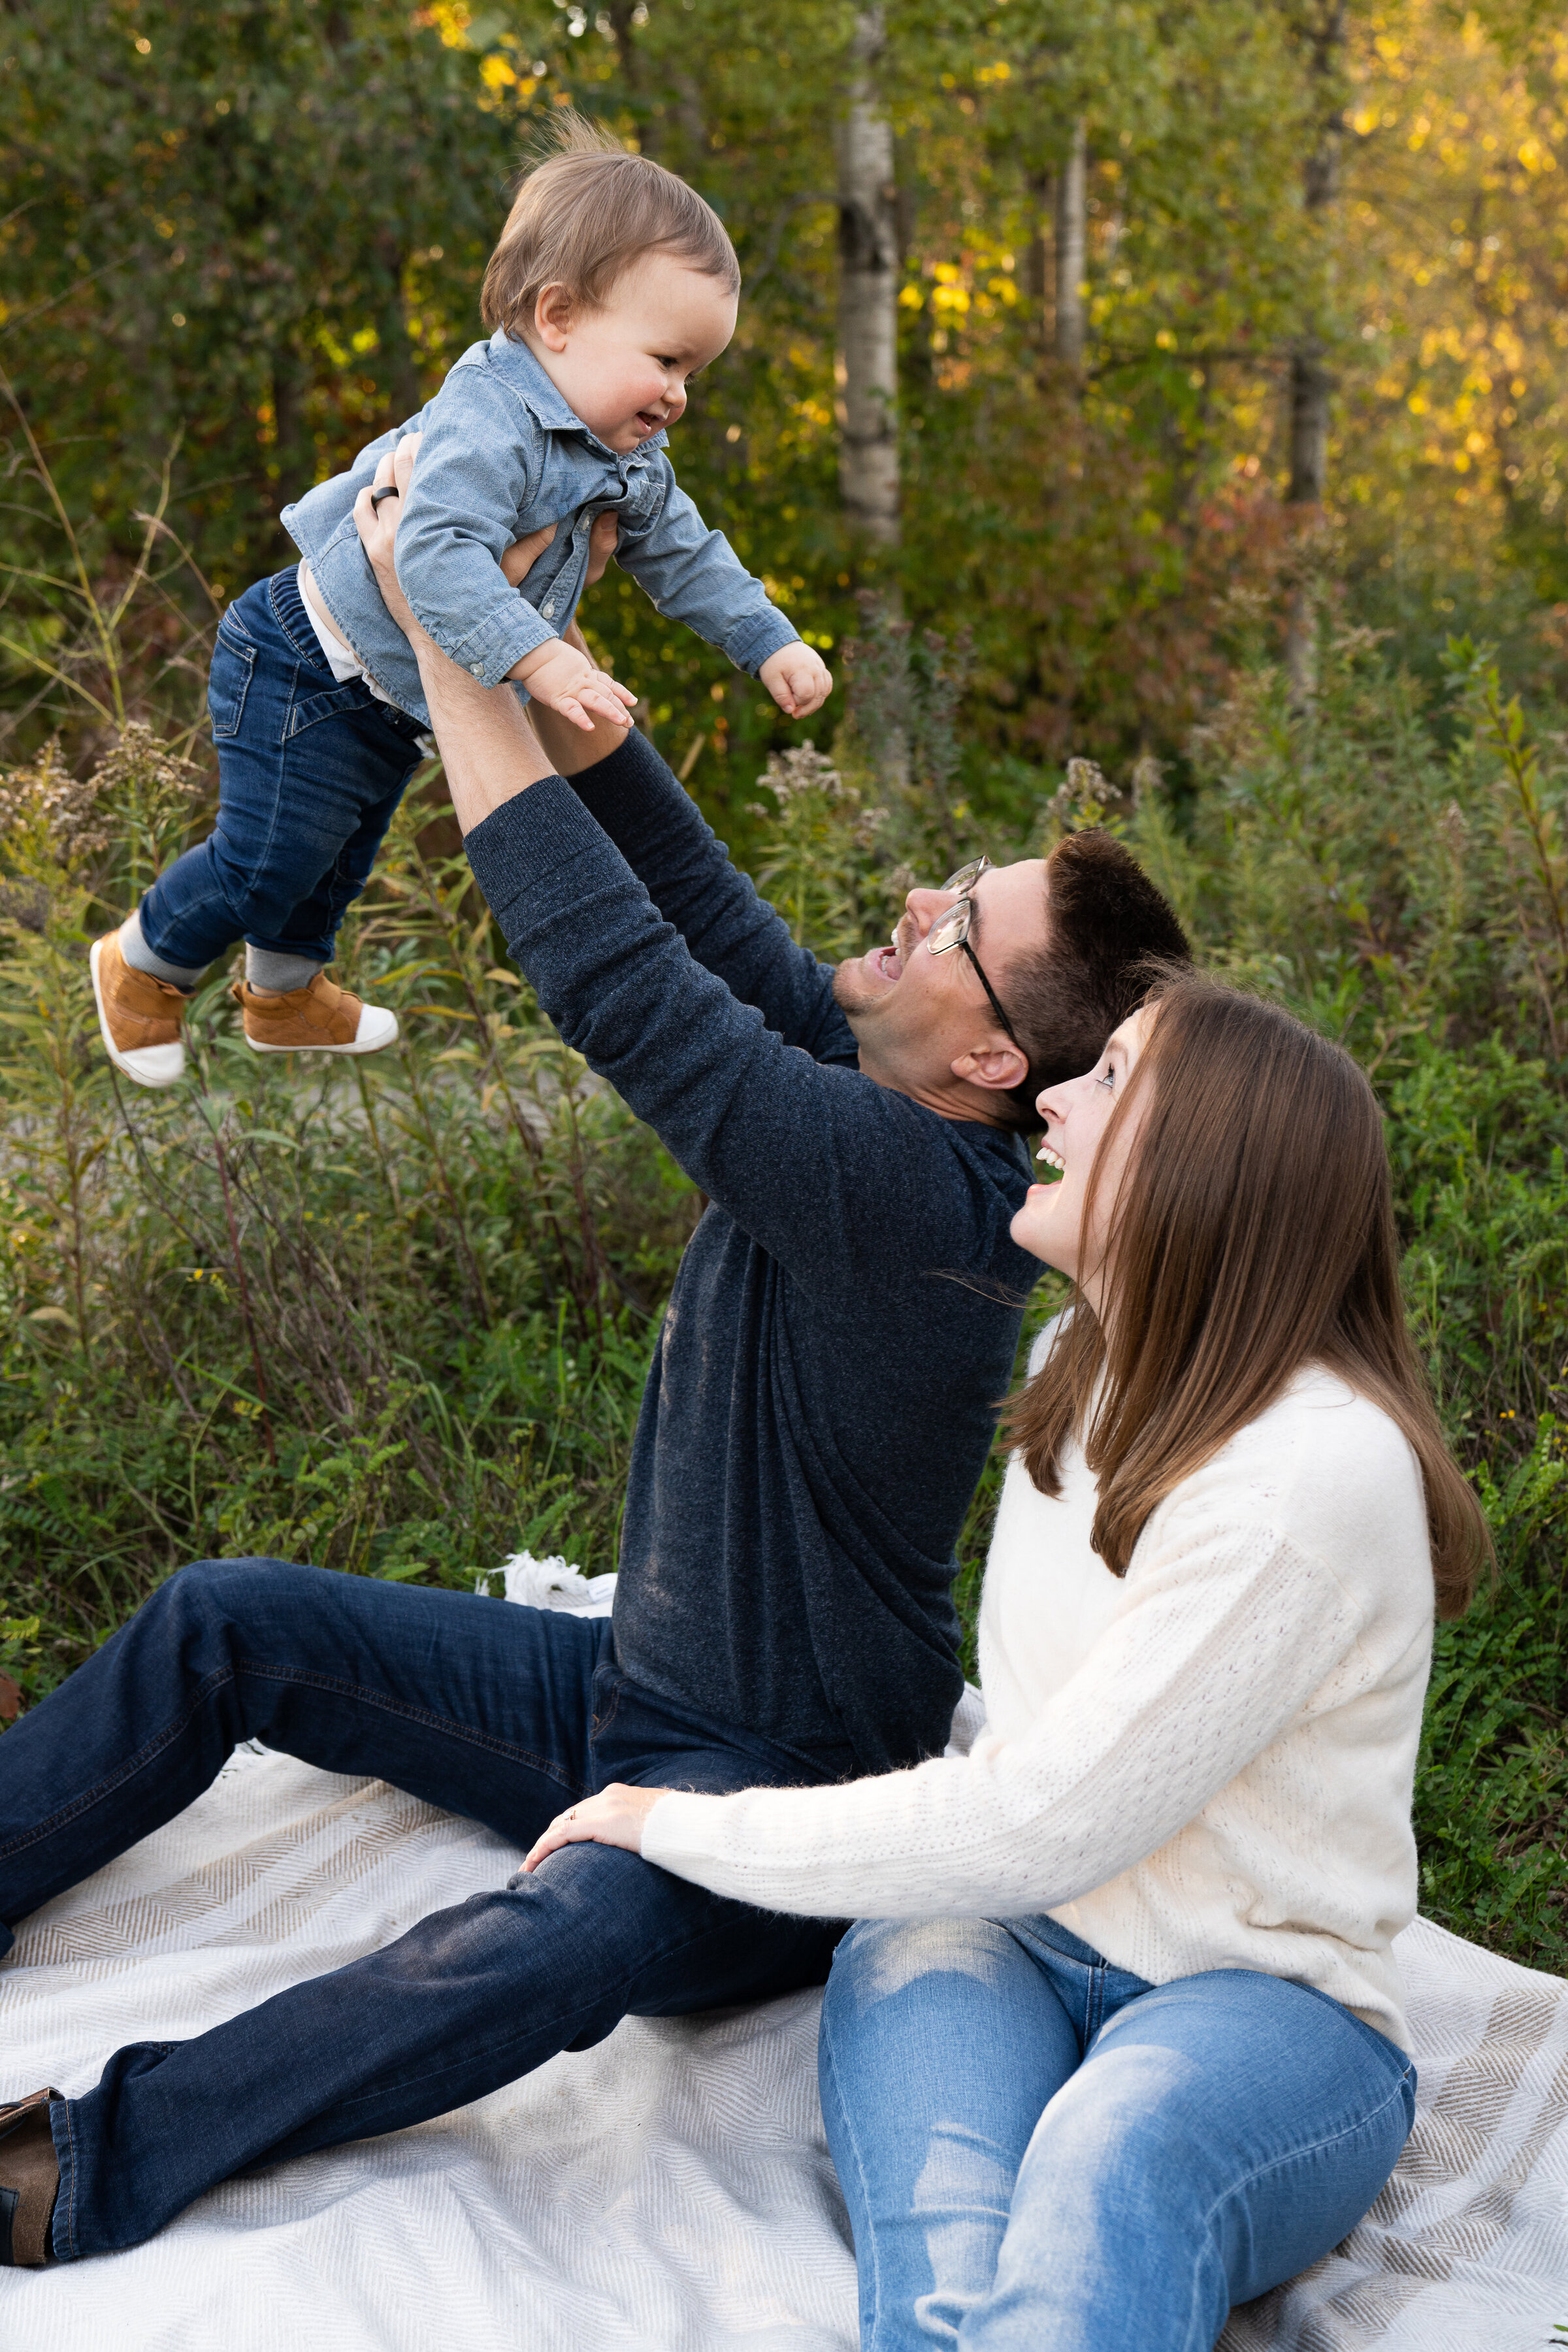 A father lifts his son up in the air during a family photo shoot.